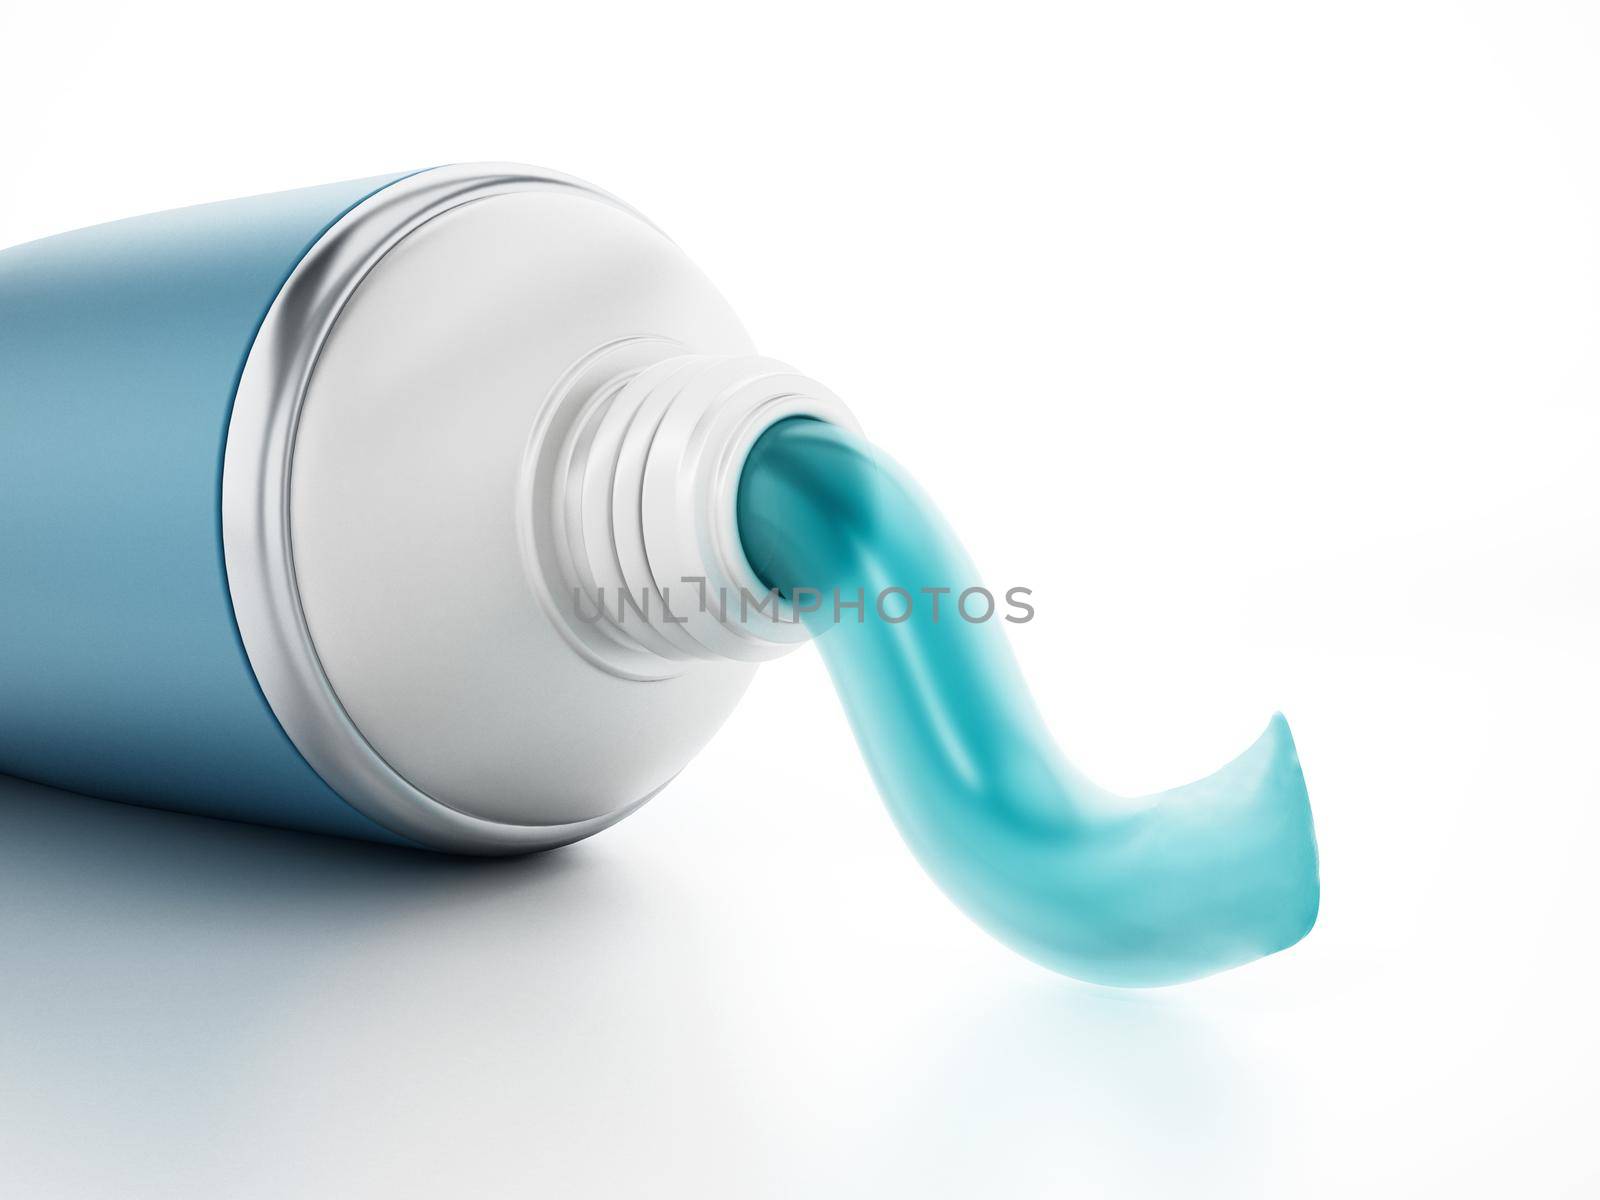 Toothpaste coming out of tube. 3D illustrationToothpaste coming out of tube. 3D illustration.